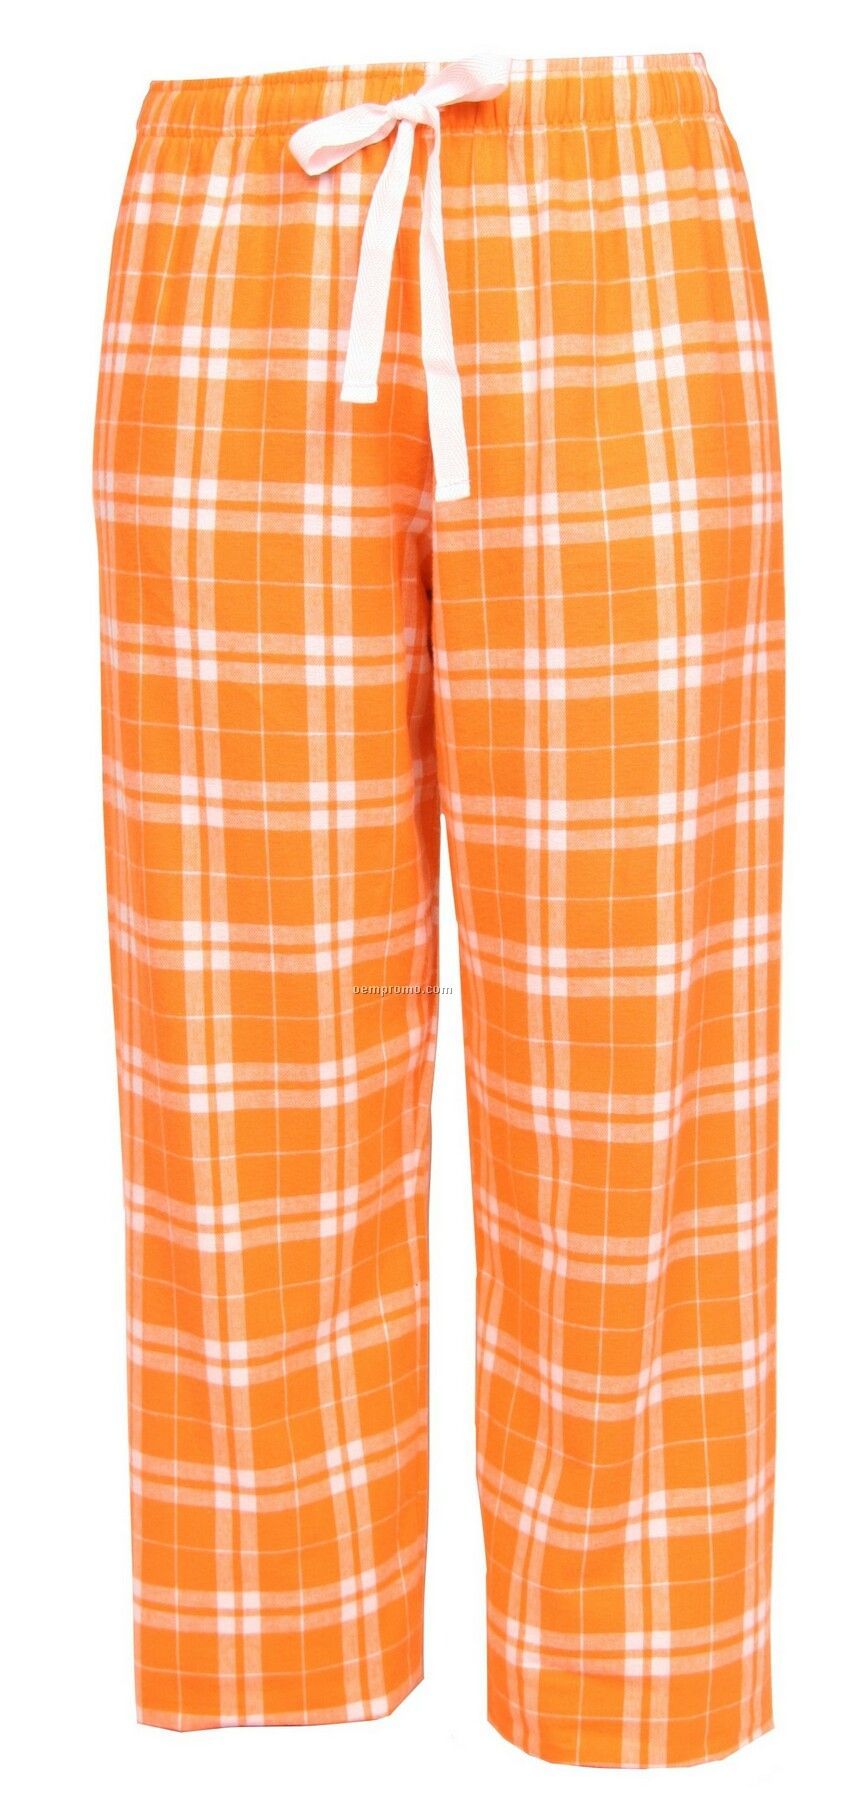 Youth Team Pride Flannel Pant In Orange & White Plaid